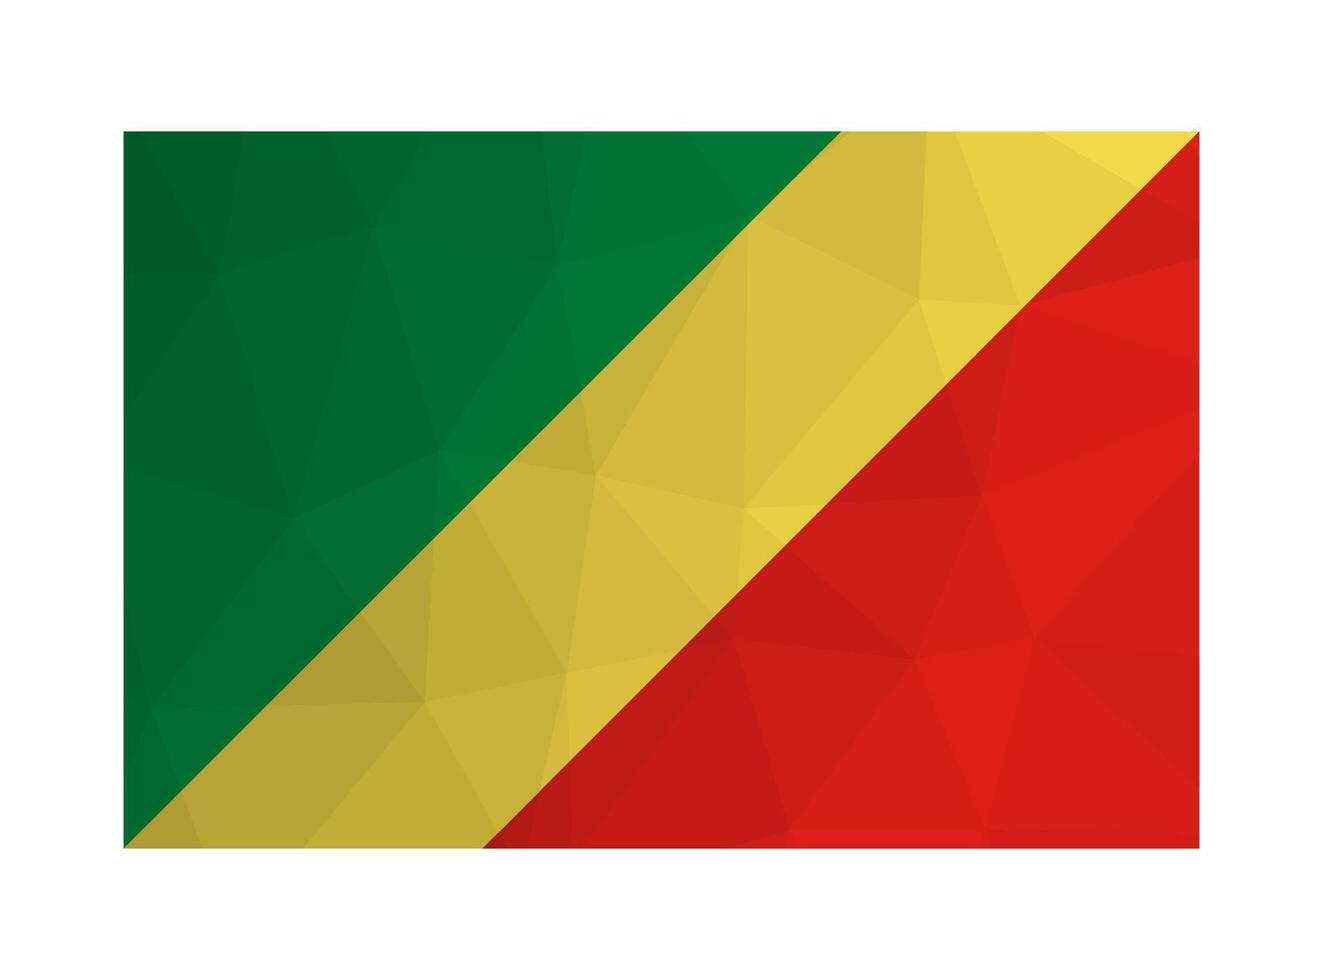 Vector isolated illustration. Official symbol of Republic of the Congo. National flag with green, yellow, red colors. Creative design in low poly style with triangular shapes. Gradient effect.